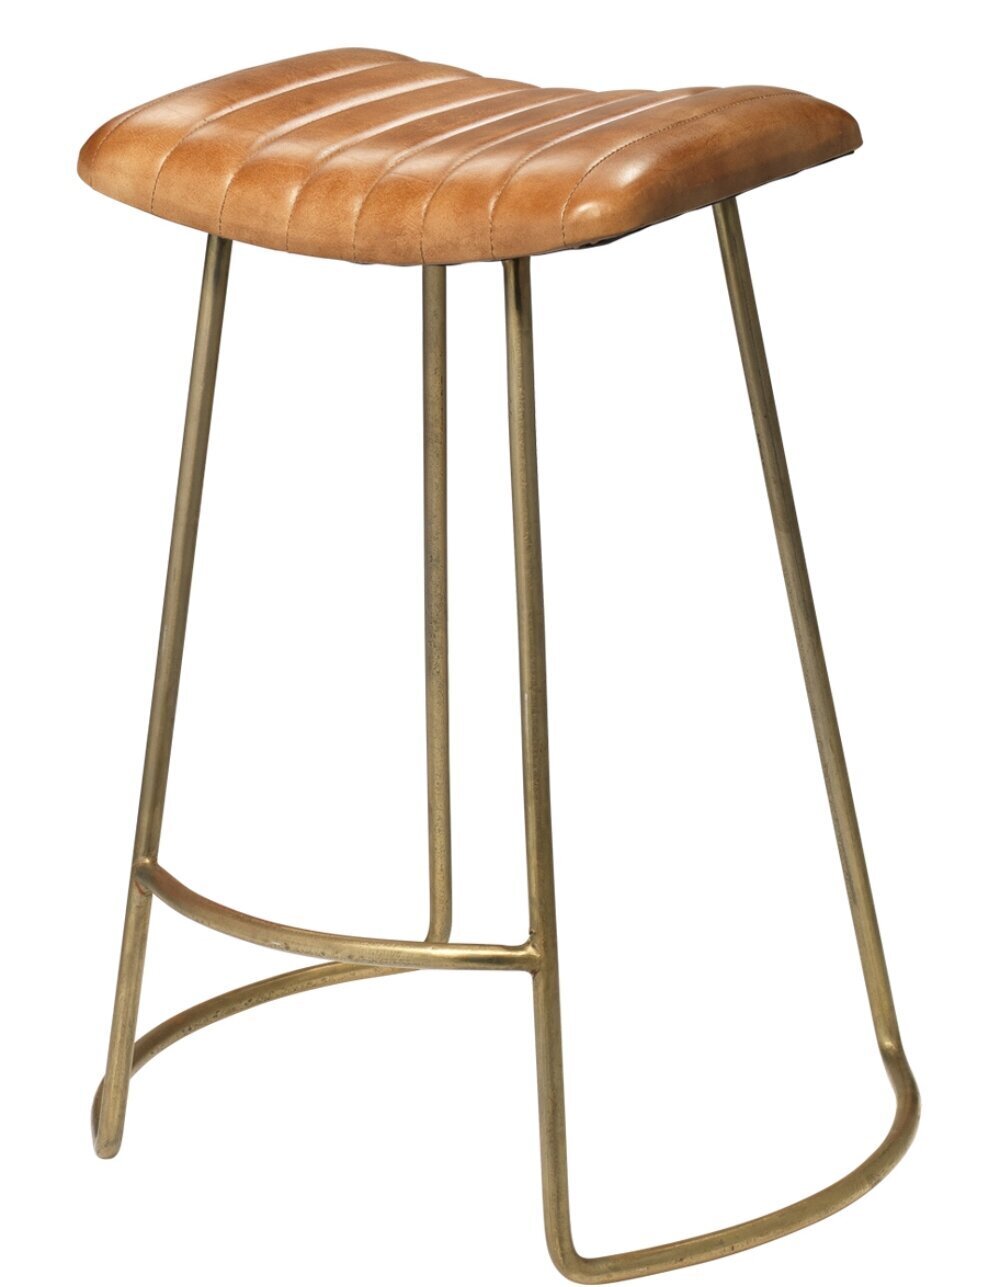 Rustic Modern Counter Stool With Leather Seat